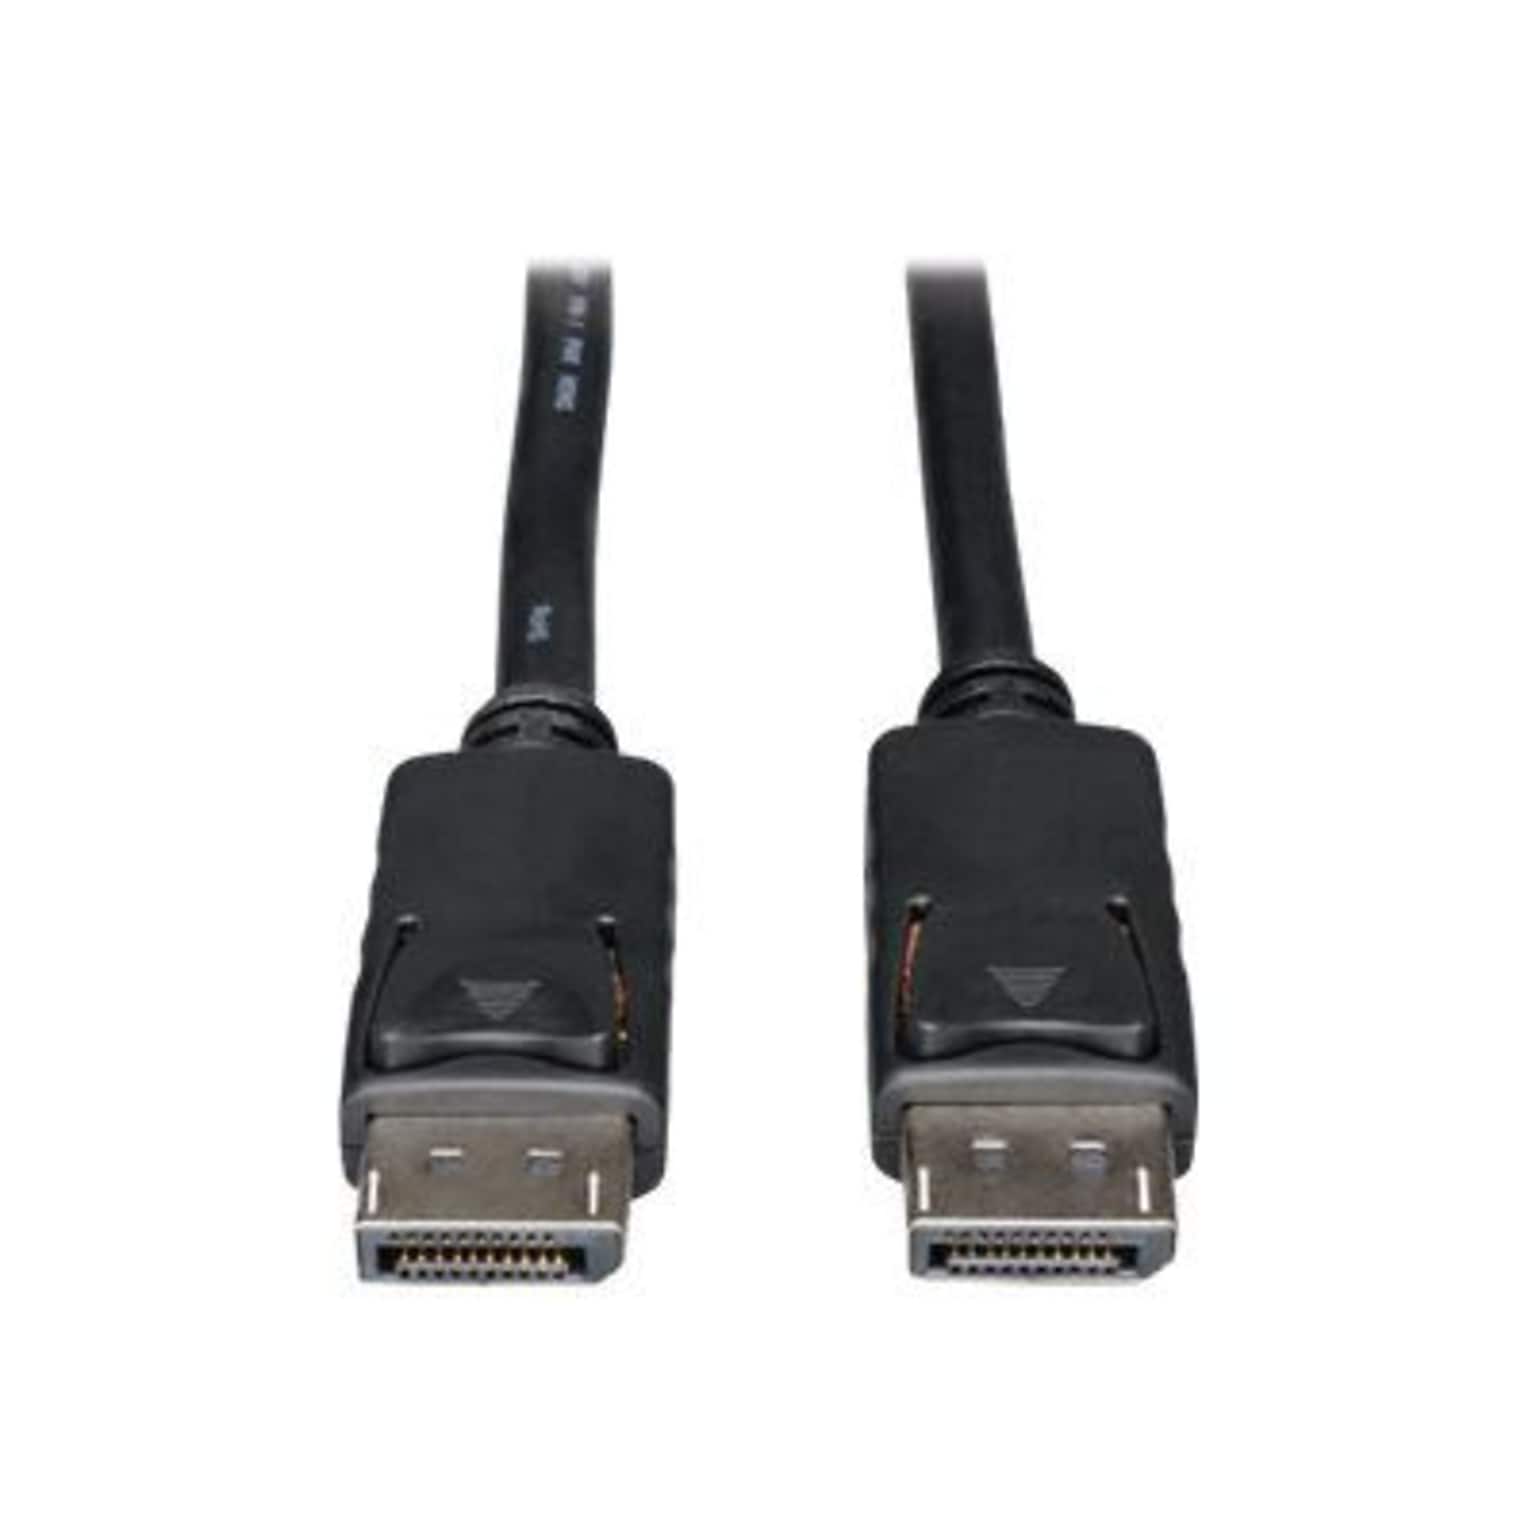 Tripp Lite P580 6 DisplayPort Male/Male Monitor Cable with Latches; Black